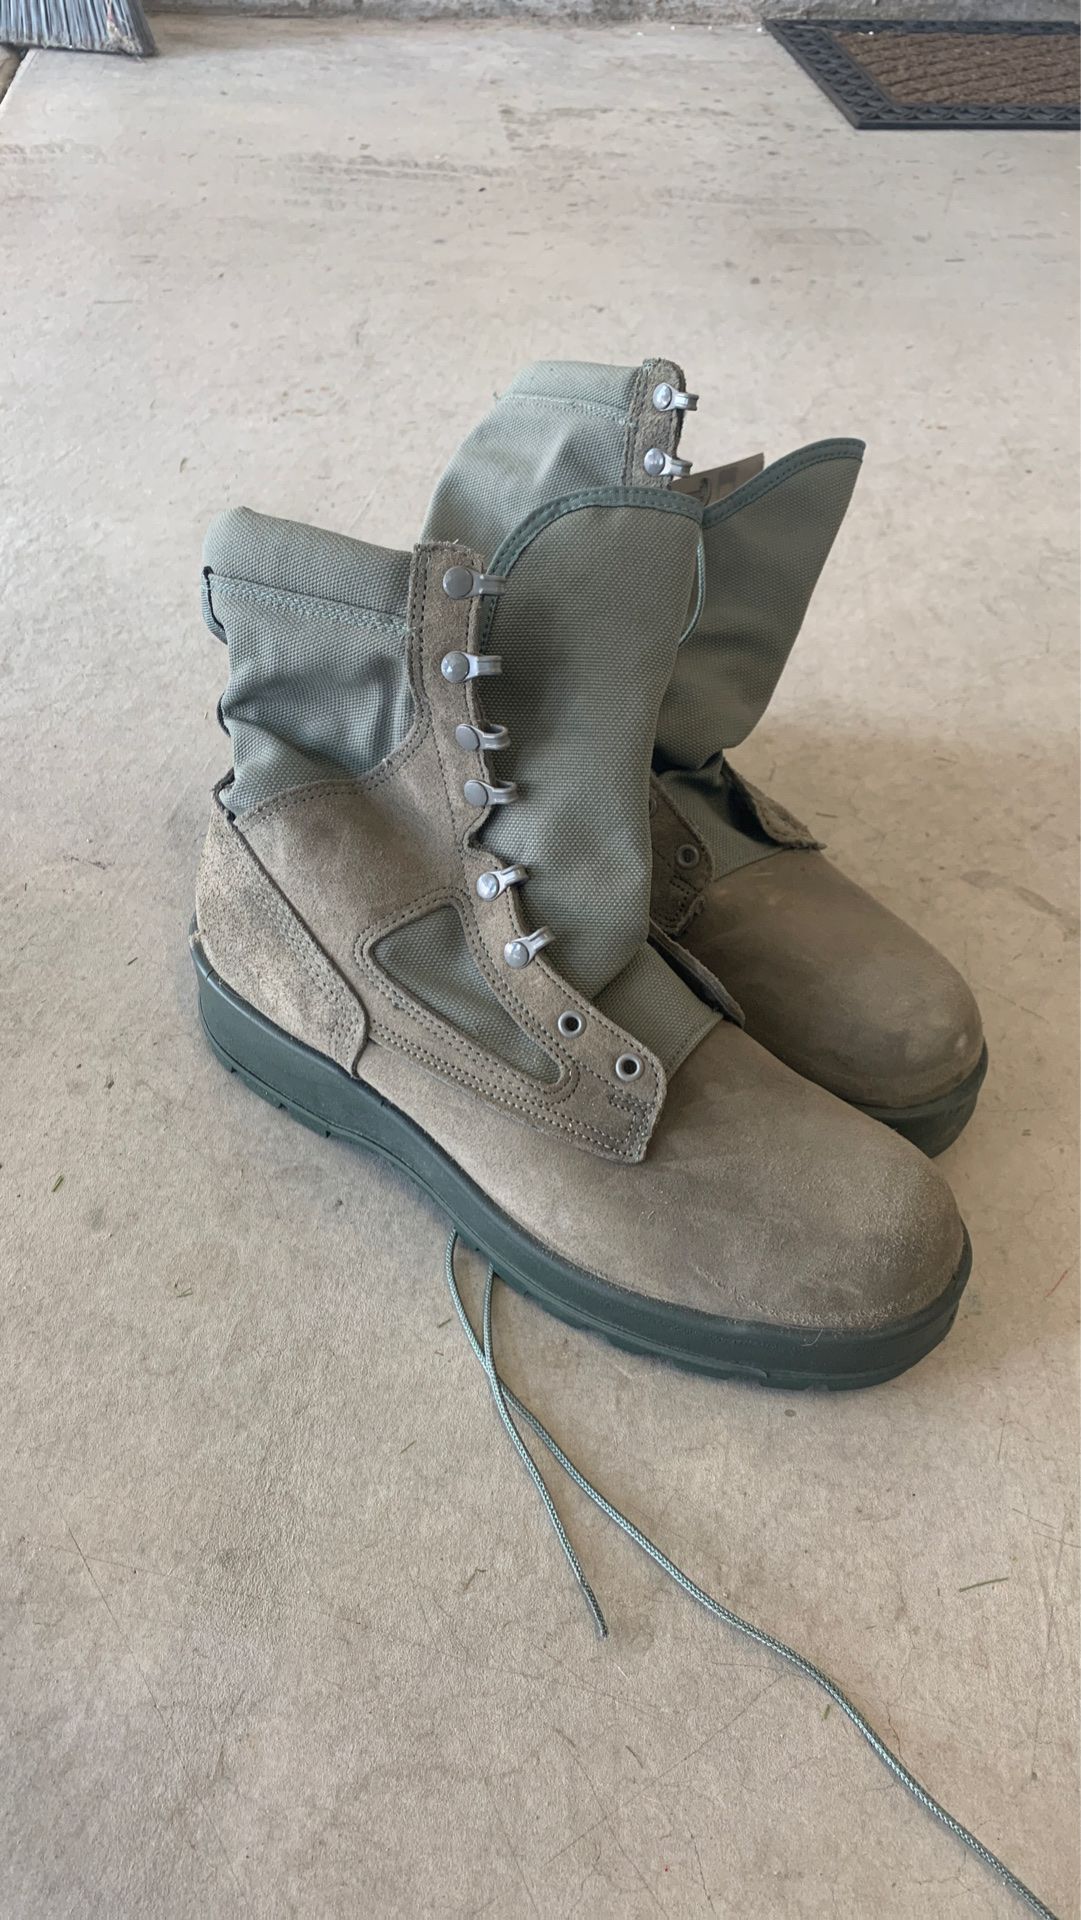 Wellco Military boots 12.5